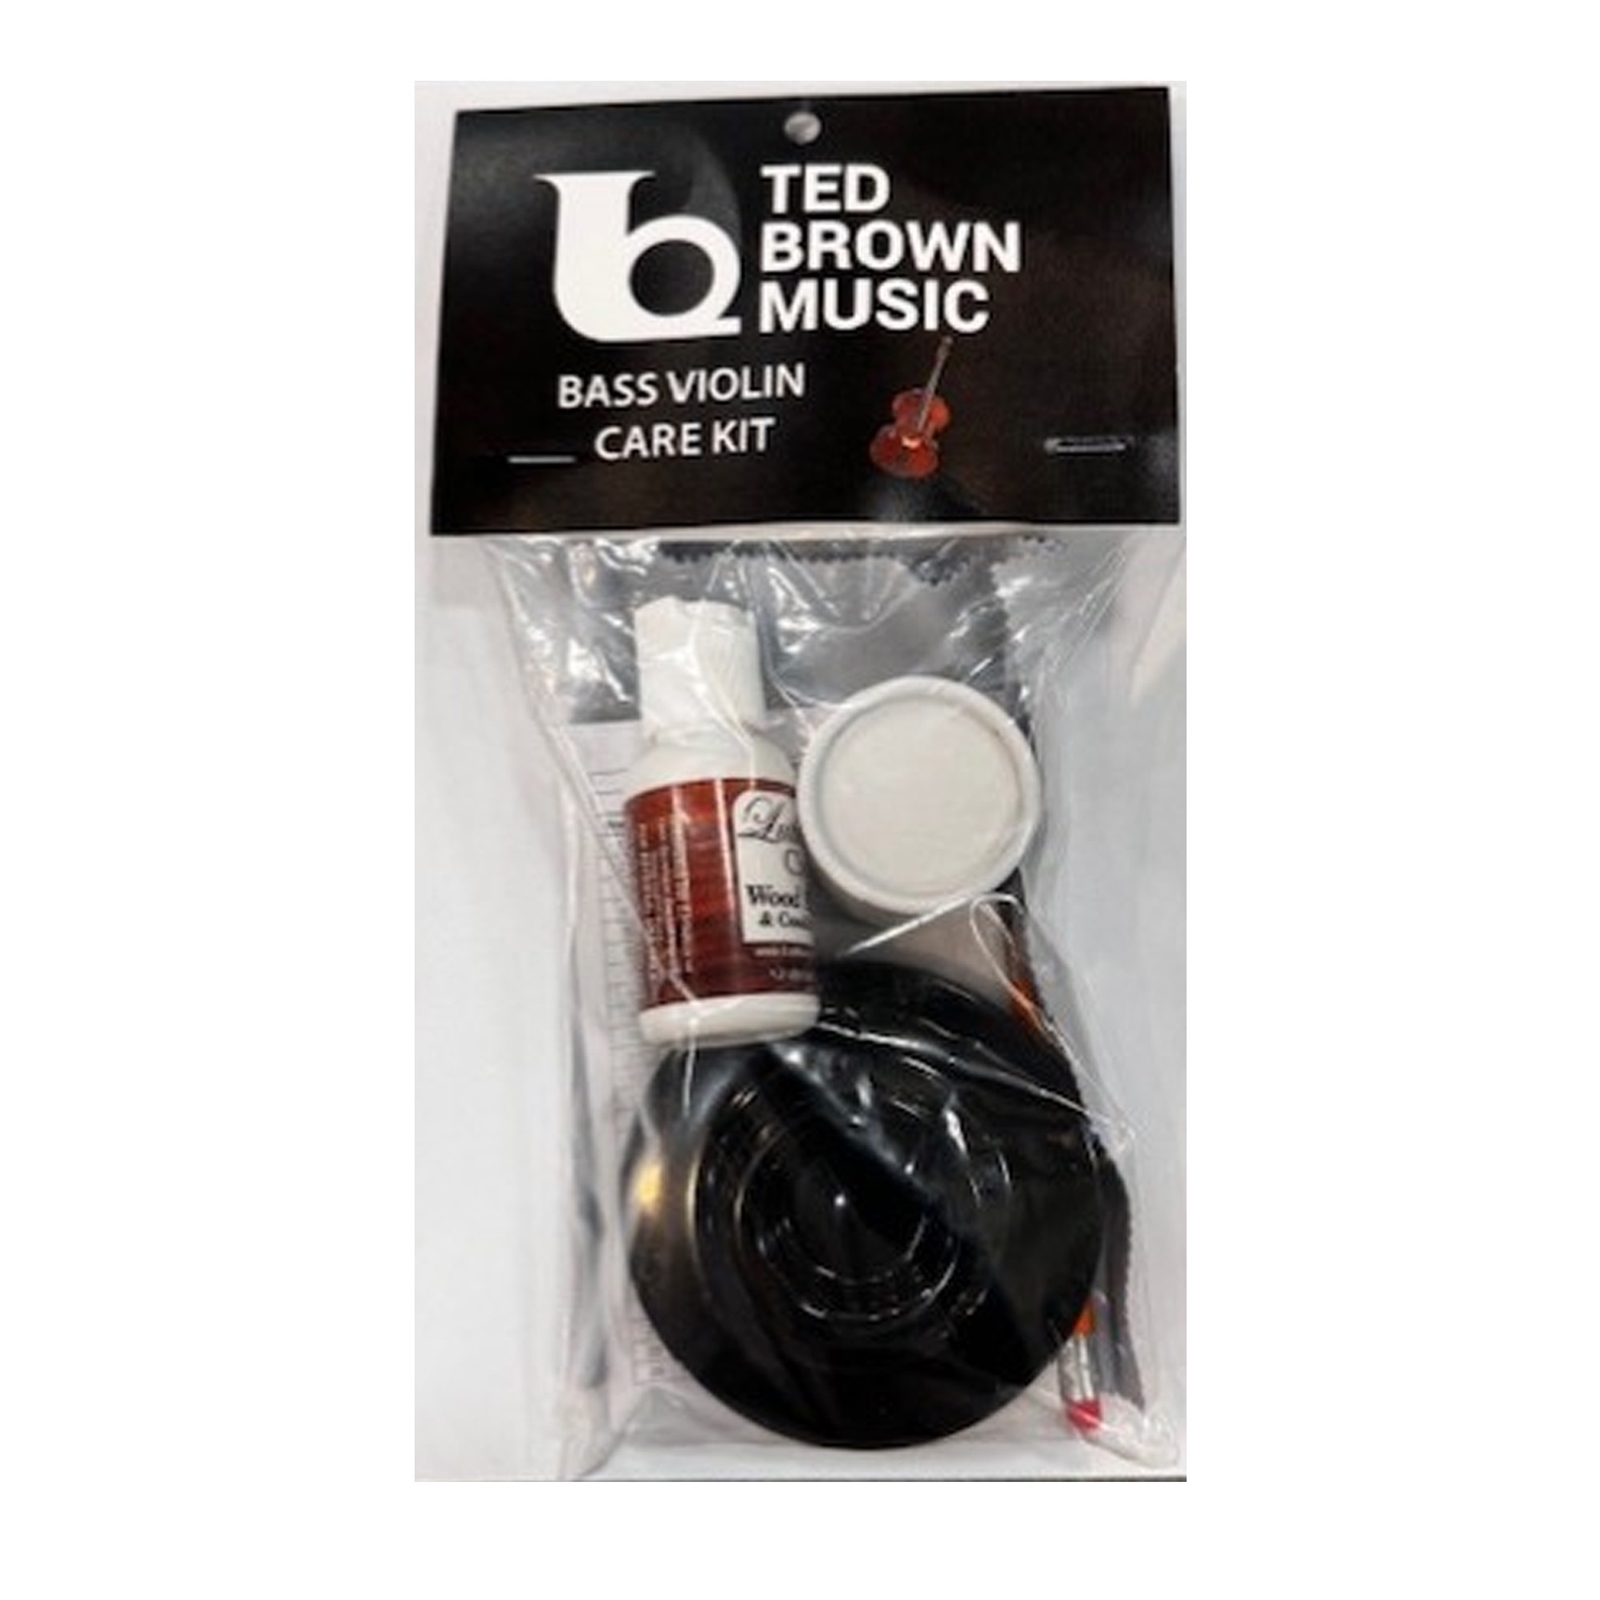 Ted Brown Music Maintenance Kit For String Instruments